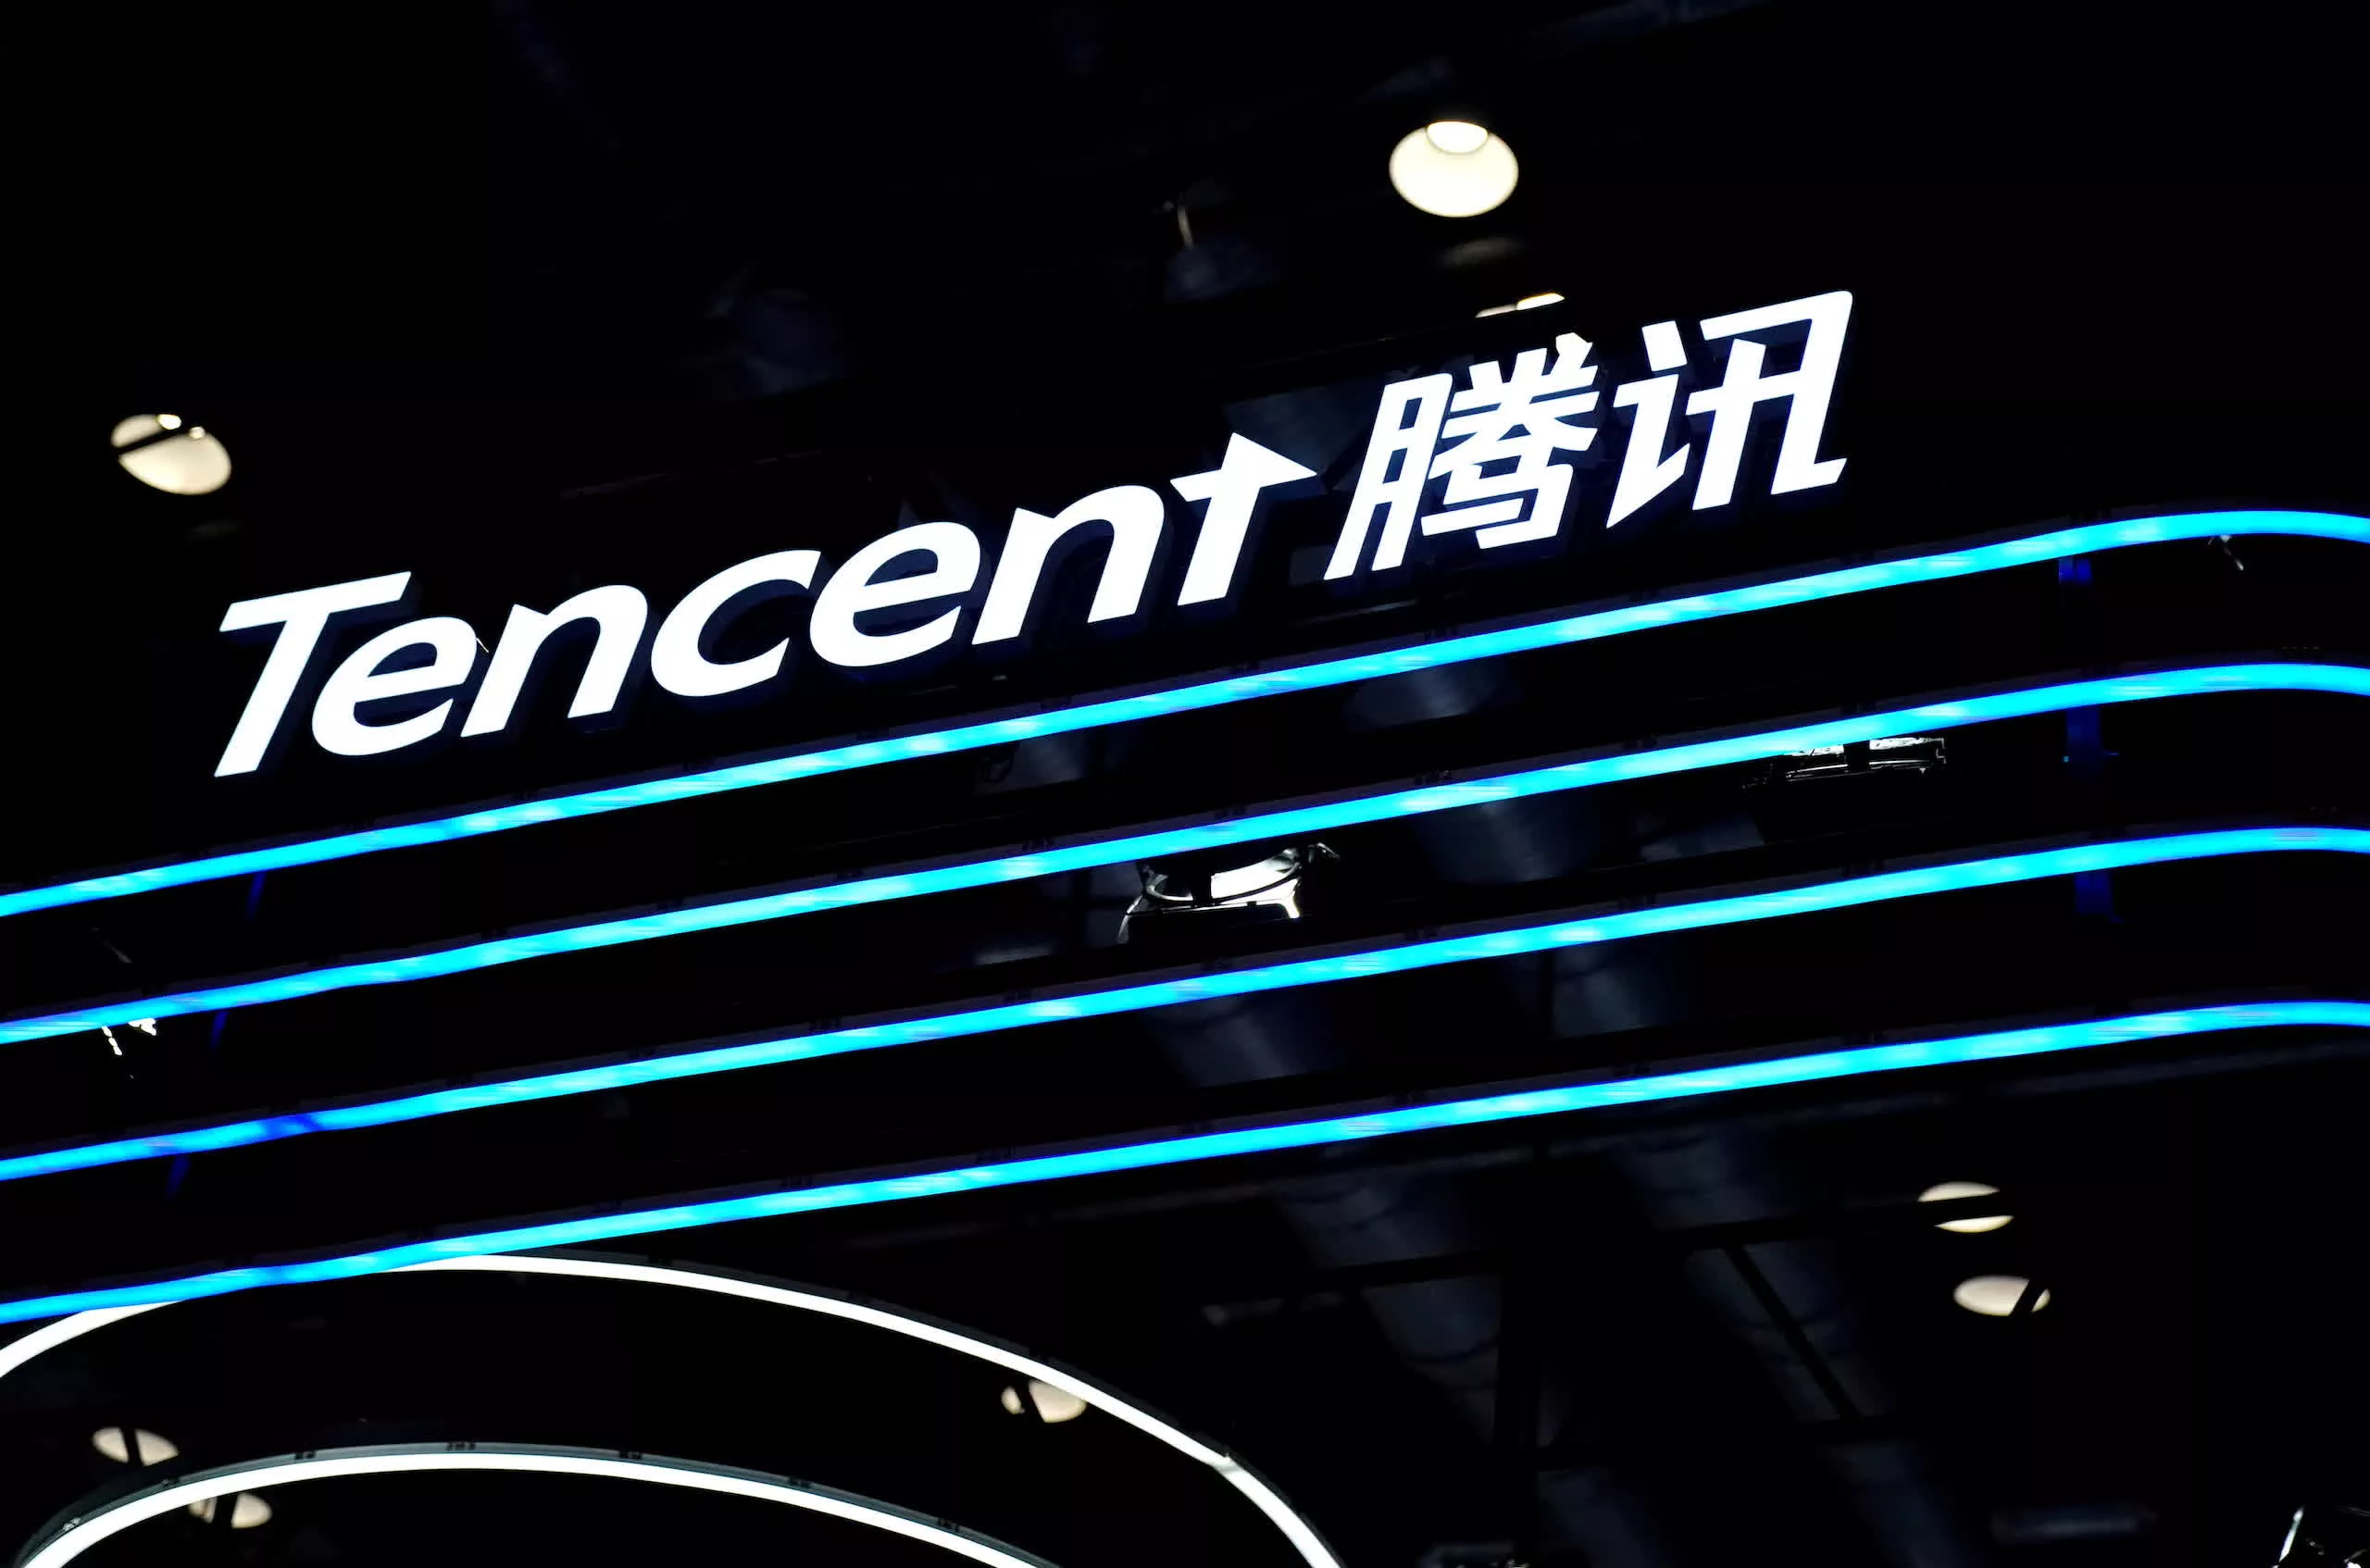 Tencent is negotiating for a bigger stake in Ubisoft